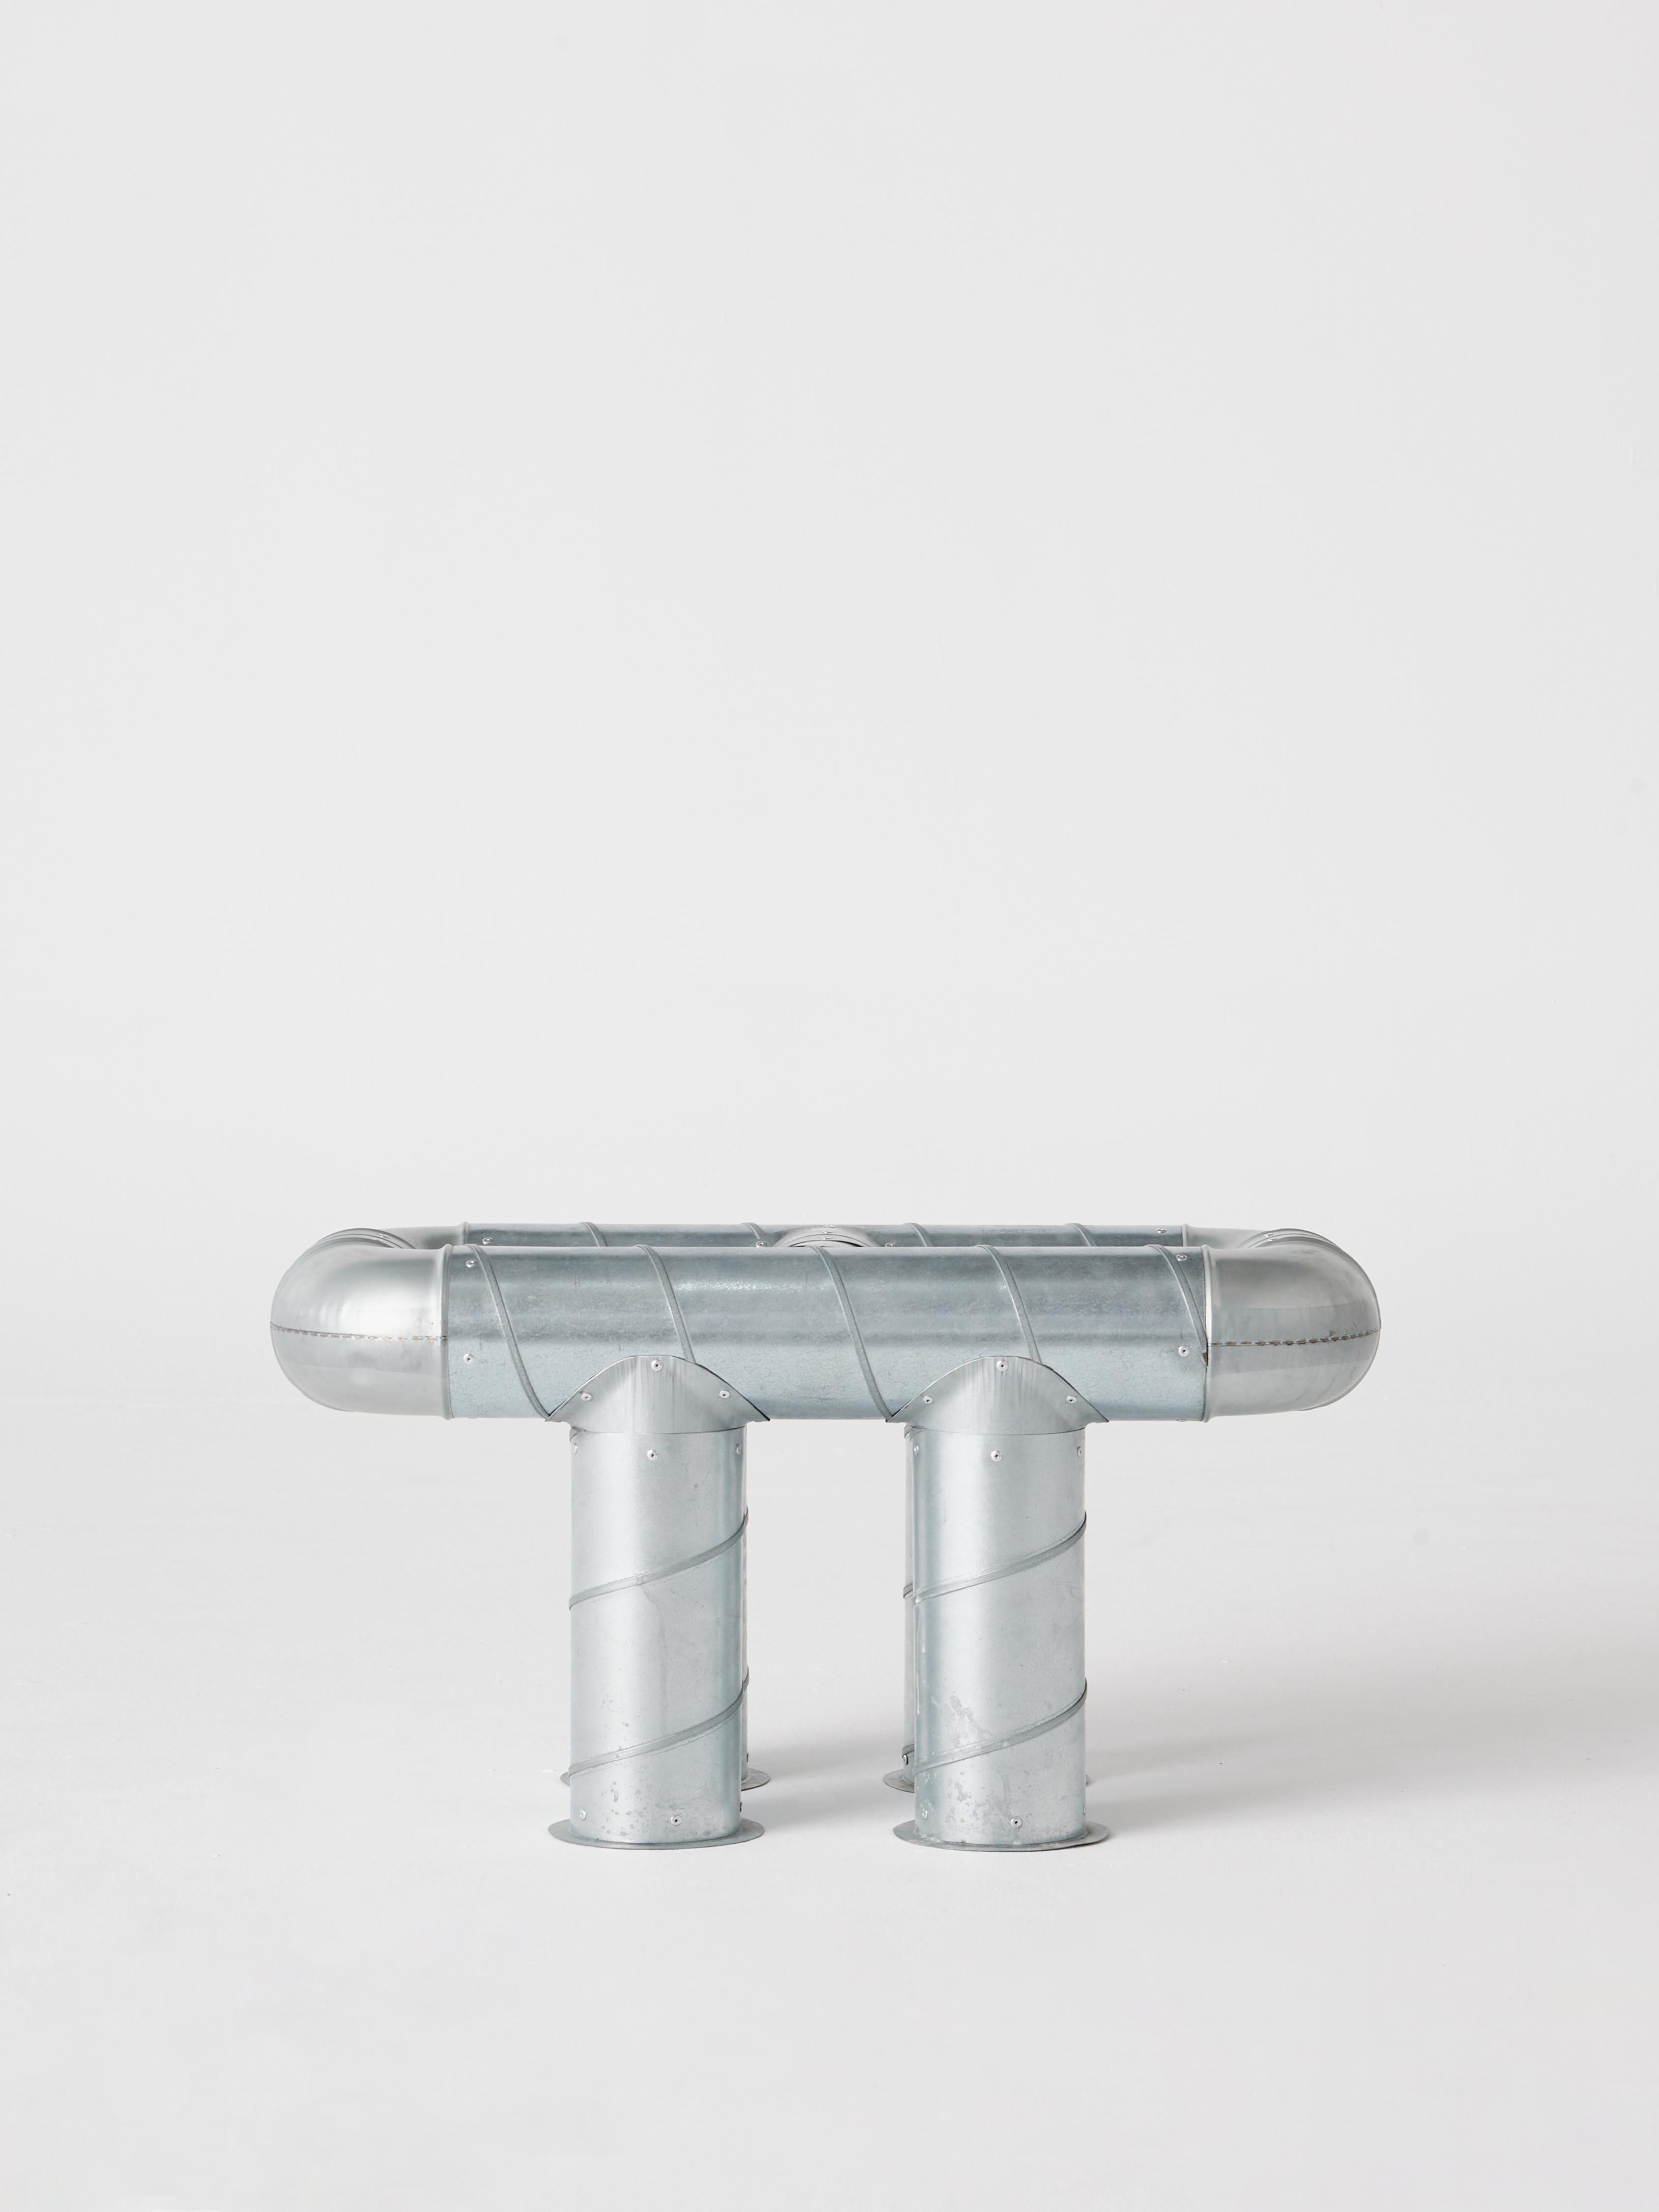 This Tubular steel stool forms part of the Series O.F.I.S (Obejcts From Intersticial Space), an ongoing research of industrial material's potential for narrative. Taking the shape and mechanic properties of those interstitial materials as a starting